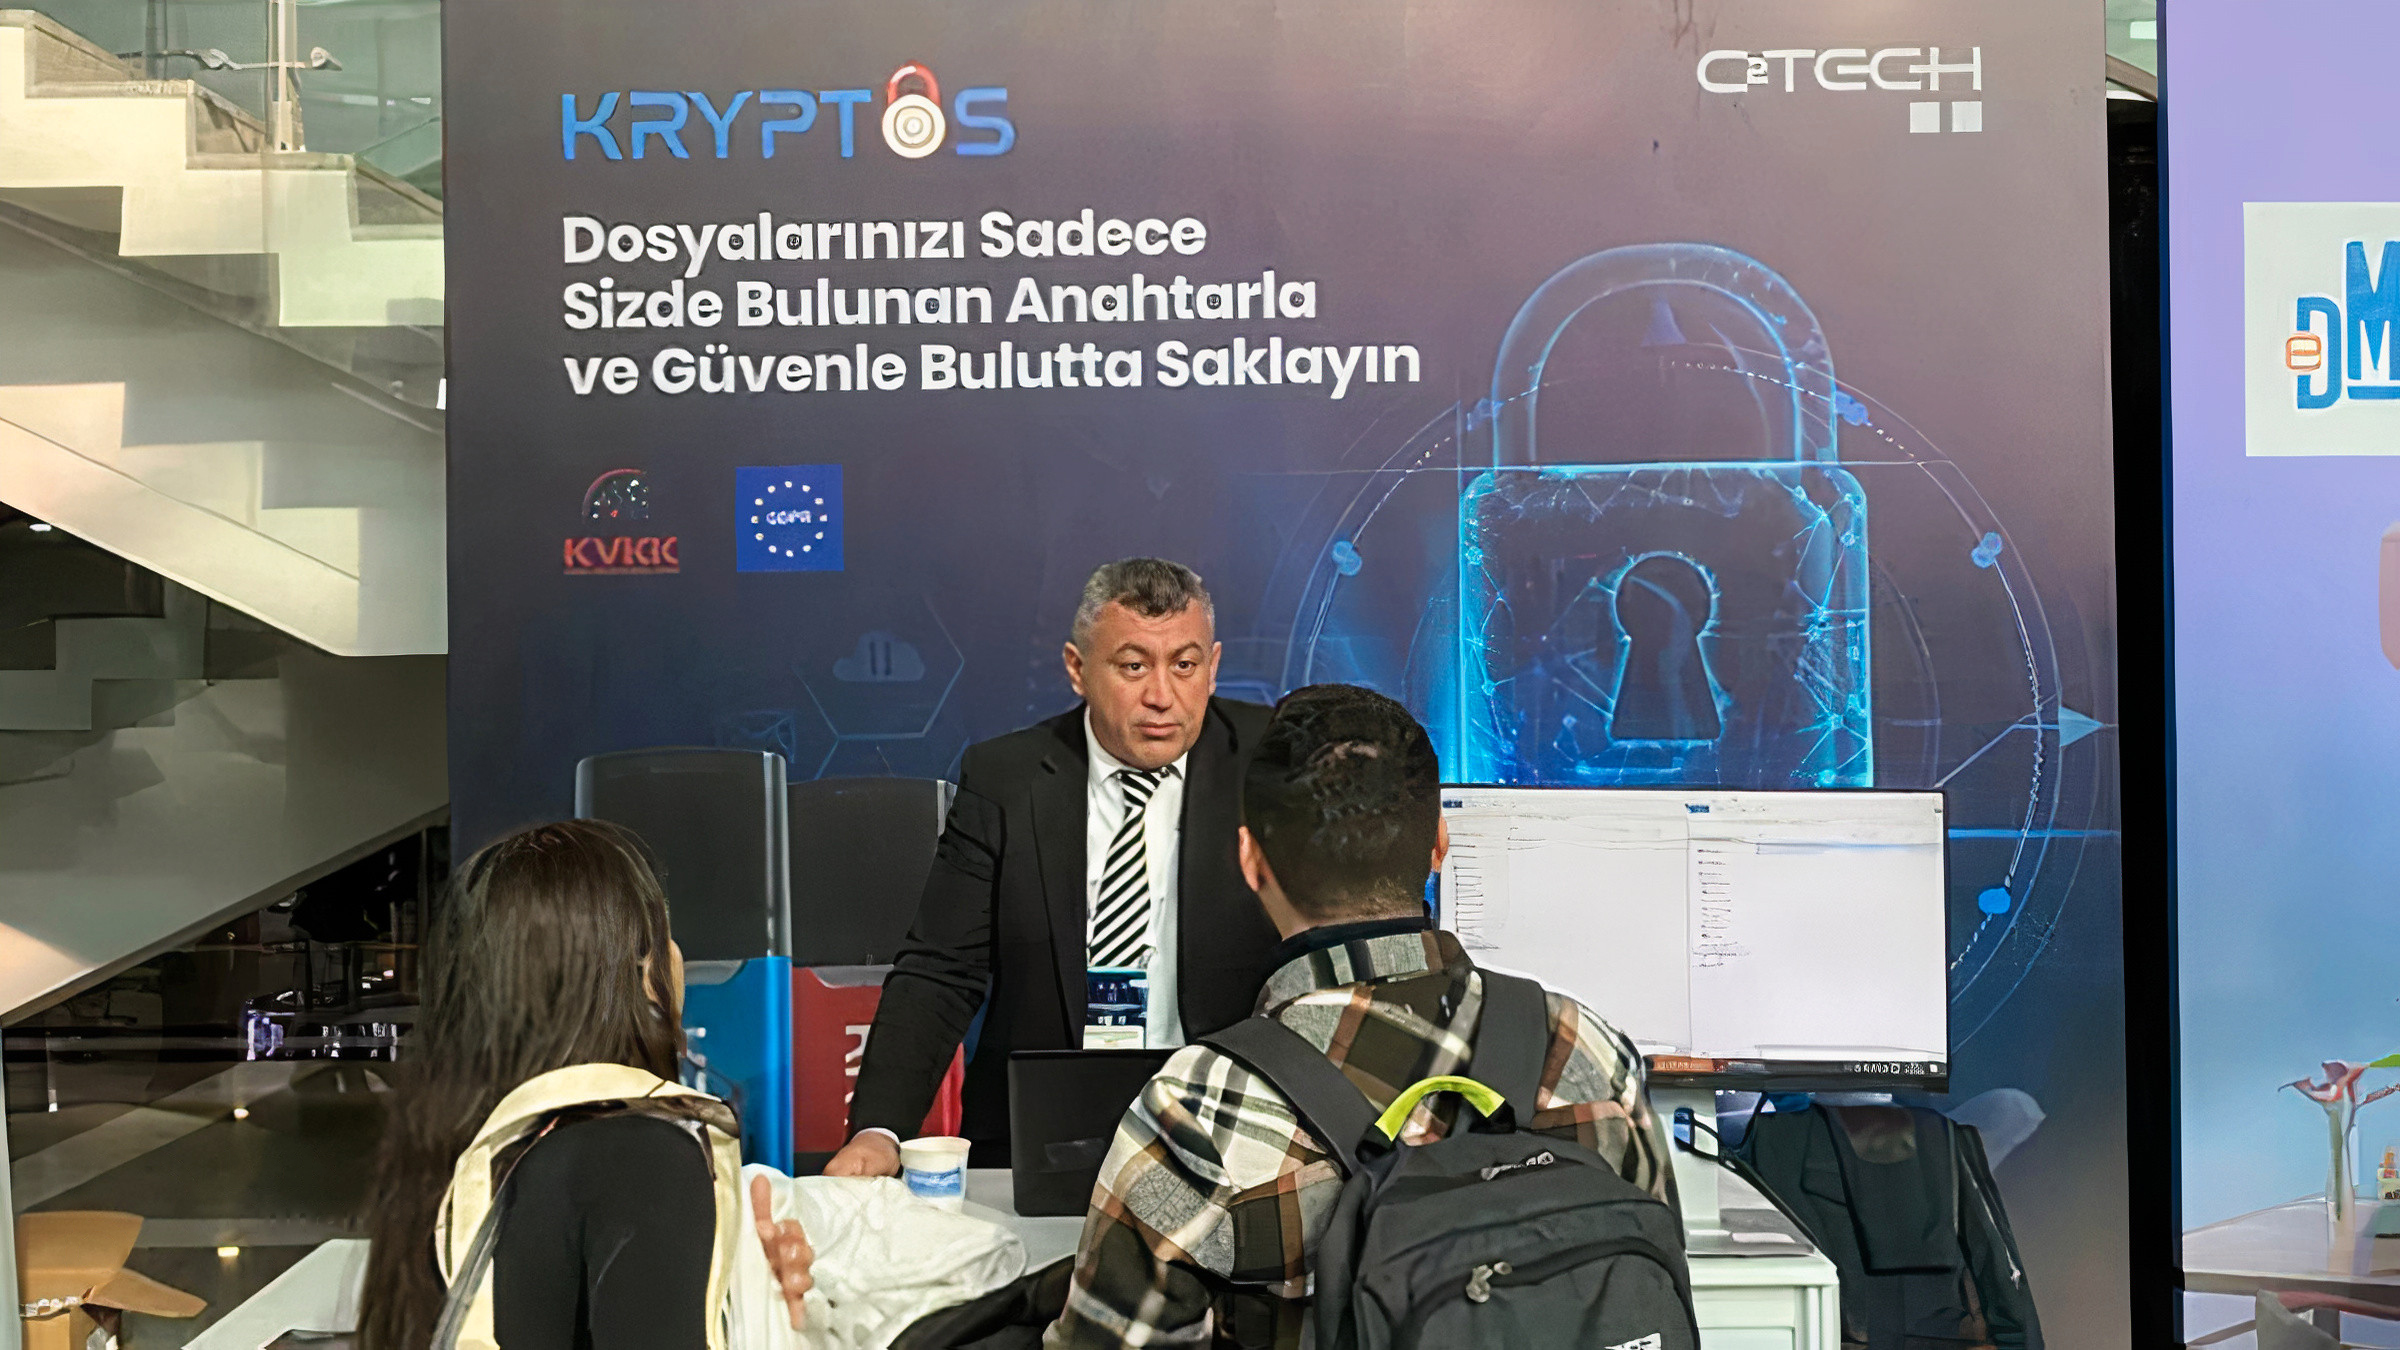 CTech | CTech participated in Cyber Security Week